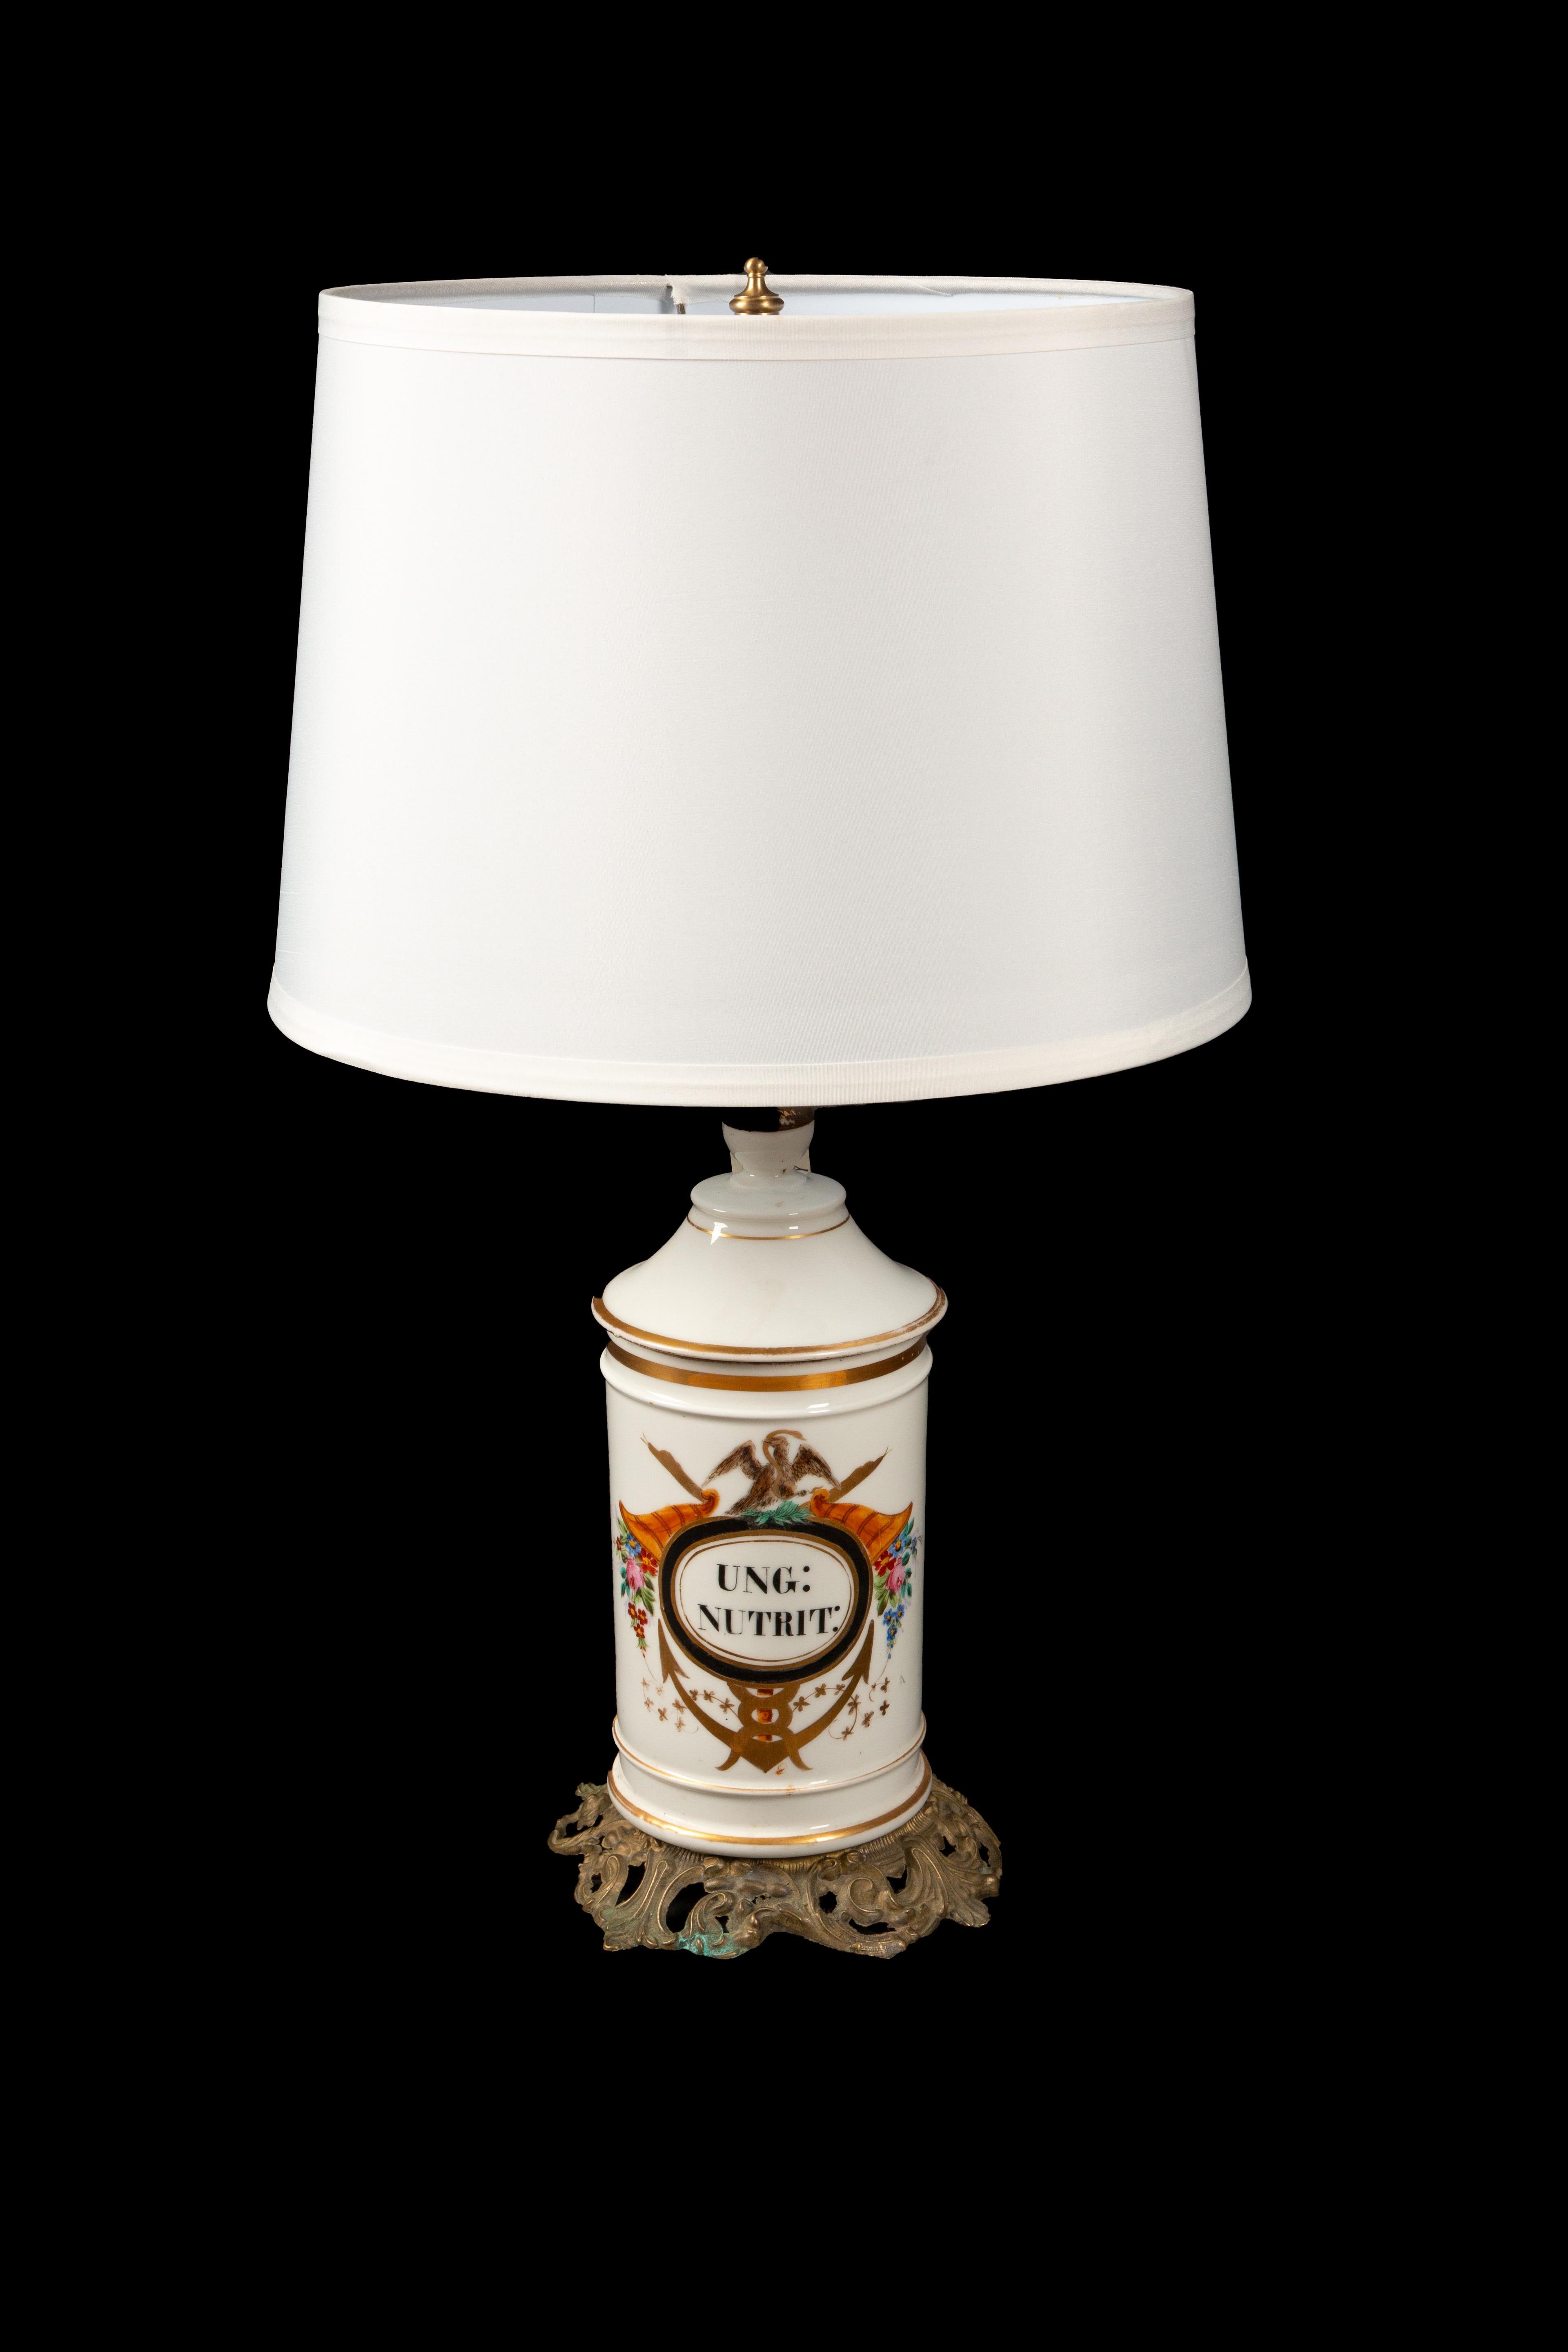 19th Century Apothecary Jar Mounted as a Lamp

22.5